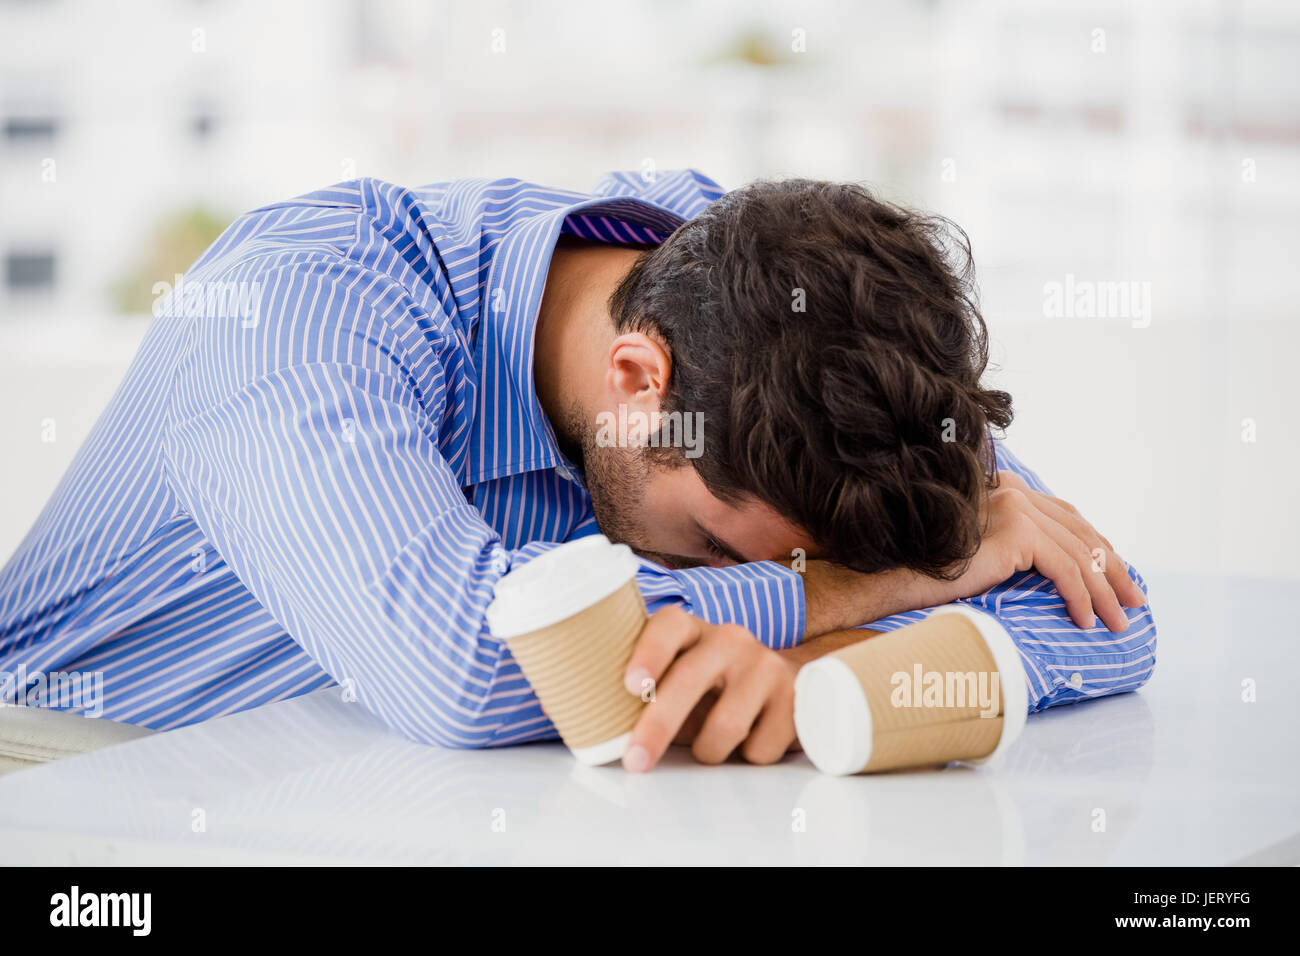 Businessman Putting His Head Down On Desk Stock Photo 146814628